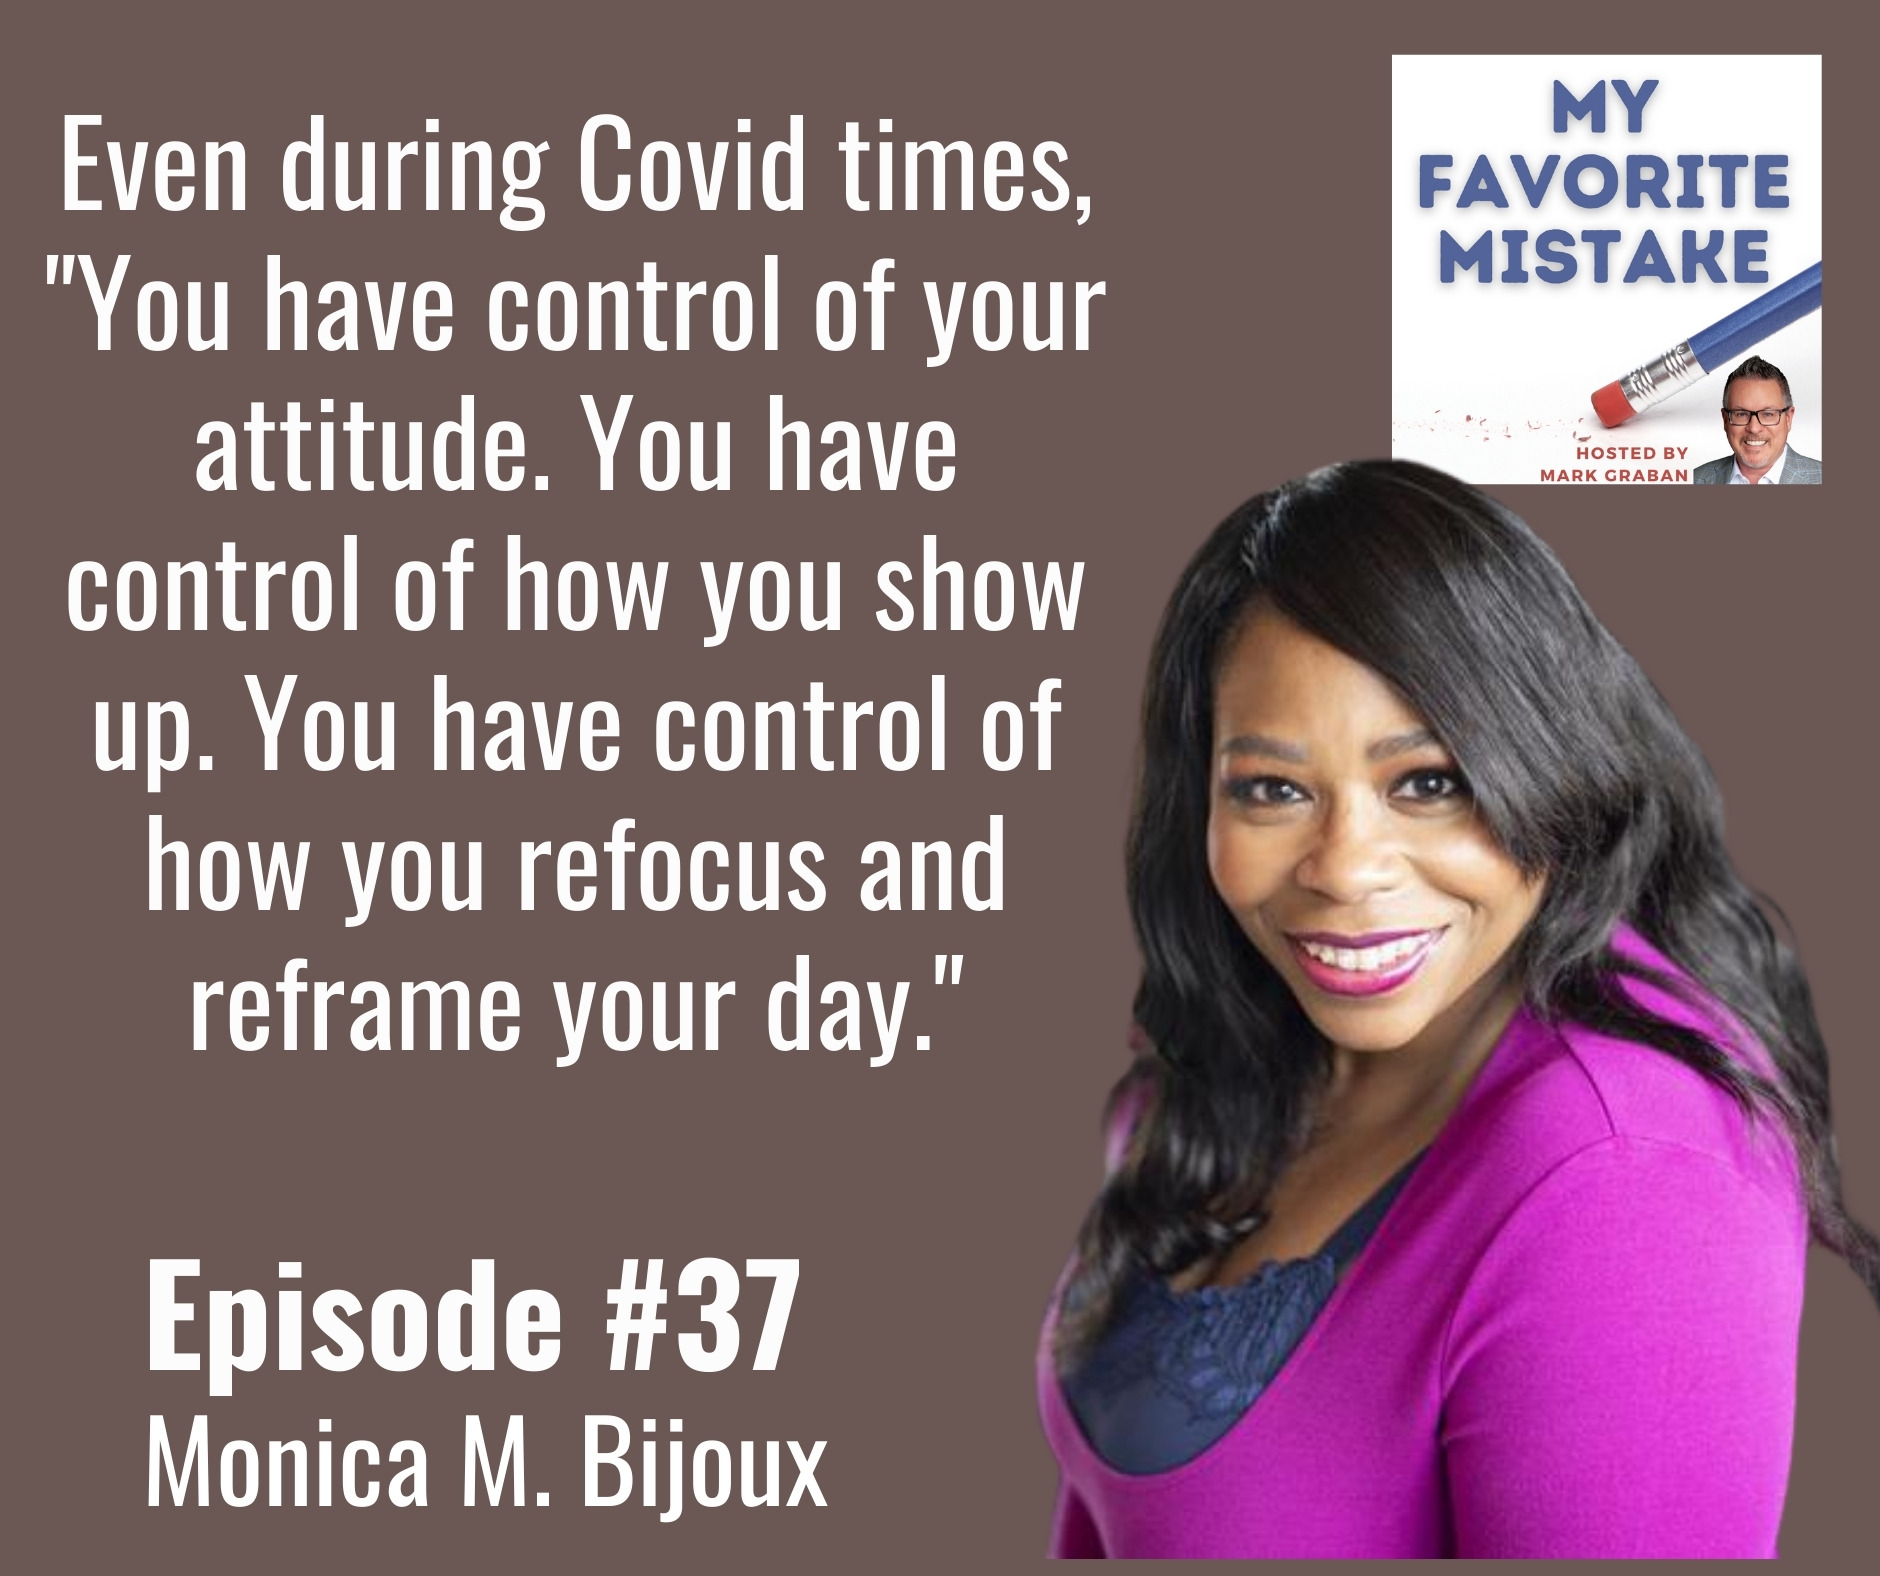 Even during Covid times, "You have control of your attitude. You have control of how you show up. You have control of how you refocus and reframe your day."